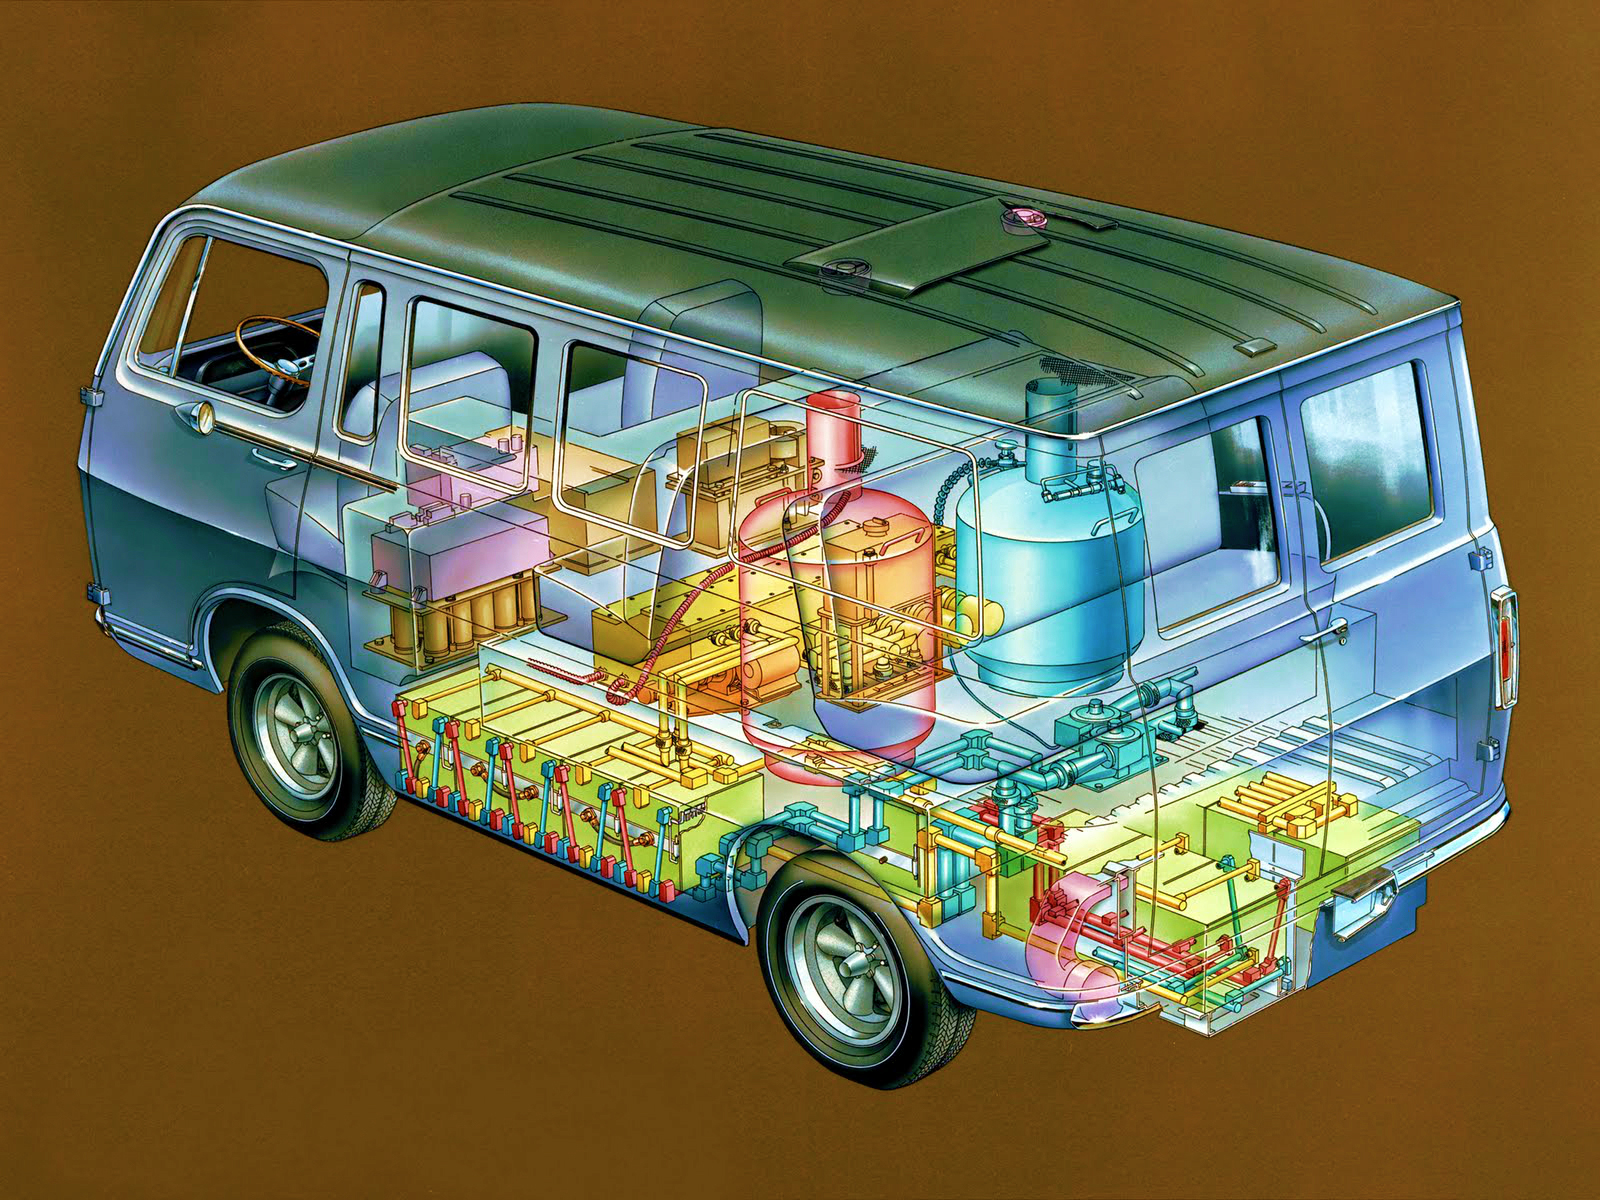 The General Motors Electrovan fuel cell vehicle